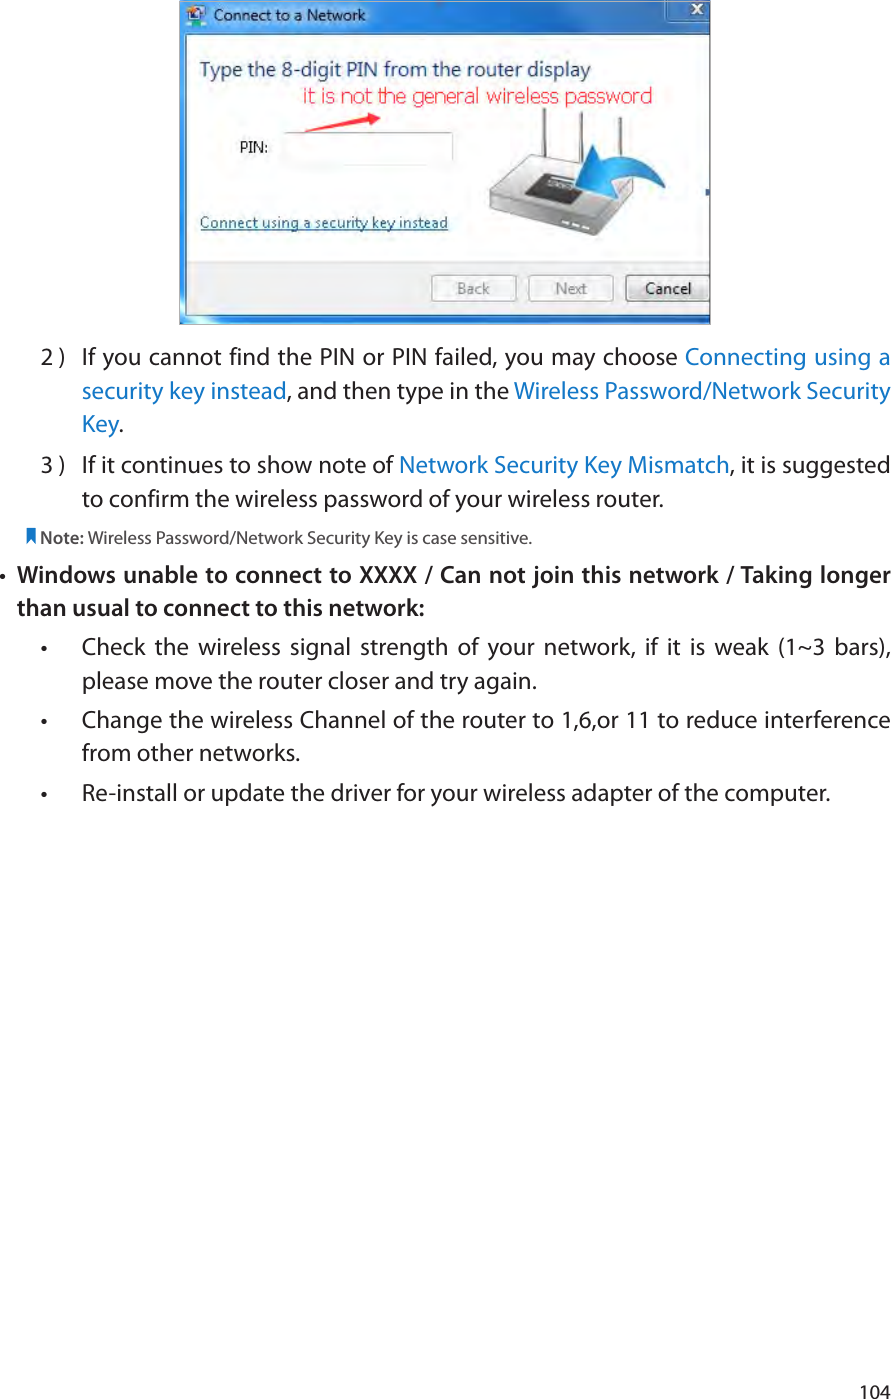 1042 )  If you cannot find the PIN or PIN failed, you may choose Connecting using a security key instead, and then type in the Wireless Password/Network Security Key.3 )  If it continues to show note of Network Security Key Mismatch, it is suggested to confirm the wireless password of your wireless router.  Note: Wireless Password/Network Security Key is case sensitive.•  Windows unable to connect to XXXX / Can not join this network / Taking longer than usual to connect to this network:•  Check the wireless signal strength of your network, if it is weak (1~3 bars), please move the router closer and try again.•  Change the wireless Channel of the router to 1,6,or 11 to reduce interference from other networks.•  Re-install or update the driver for your wireless adapter of the computer.